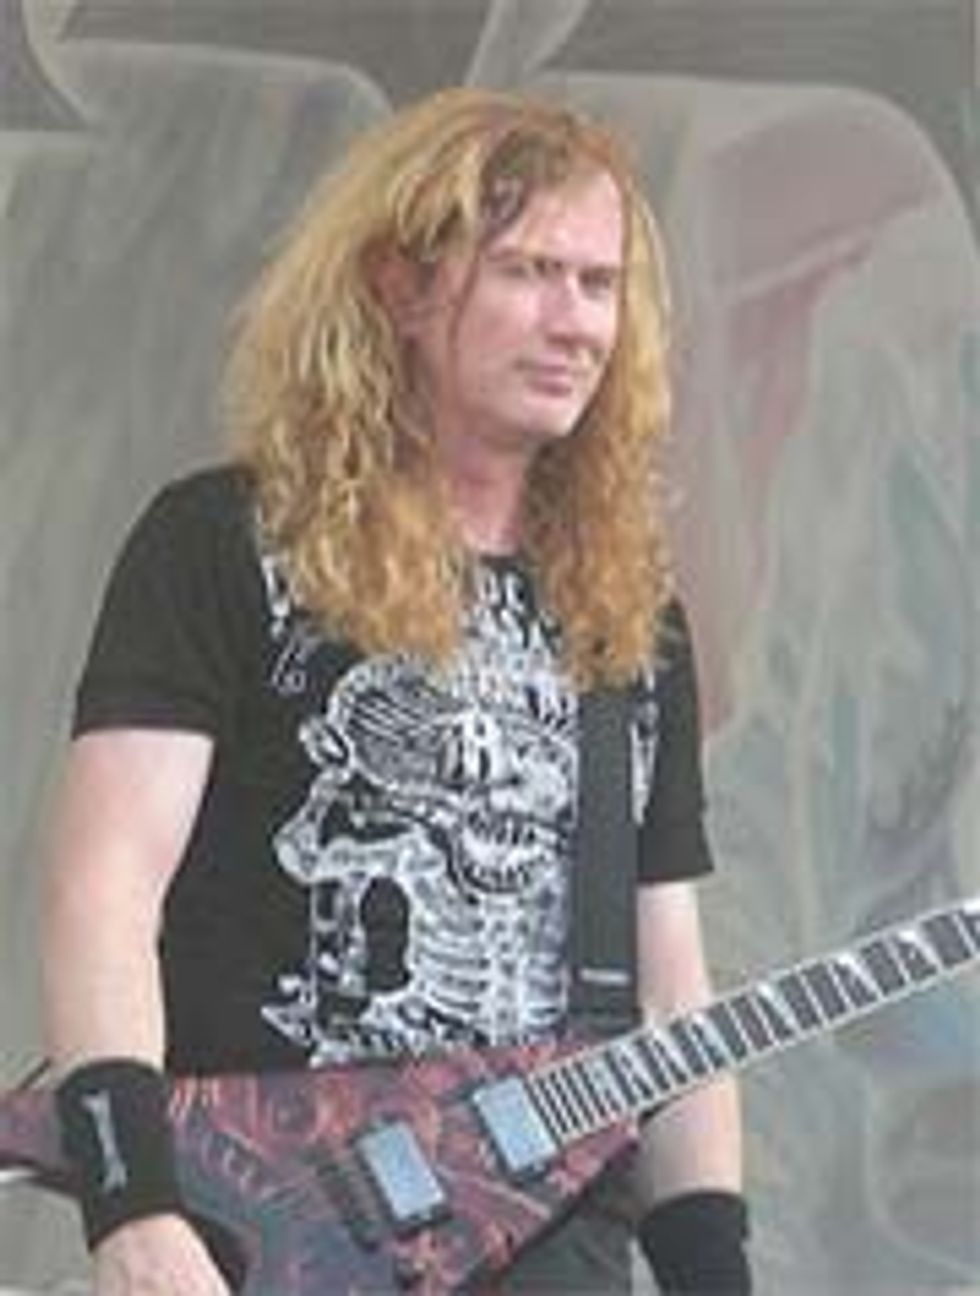 Heavy Metal Yowler Dave Mustaine Knows Obama Did All Those Shootings, Probably 9/11 Too